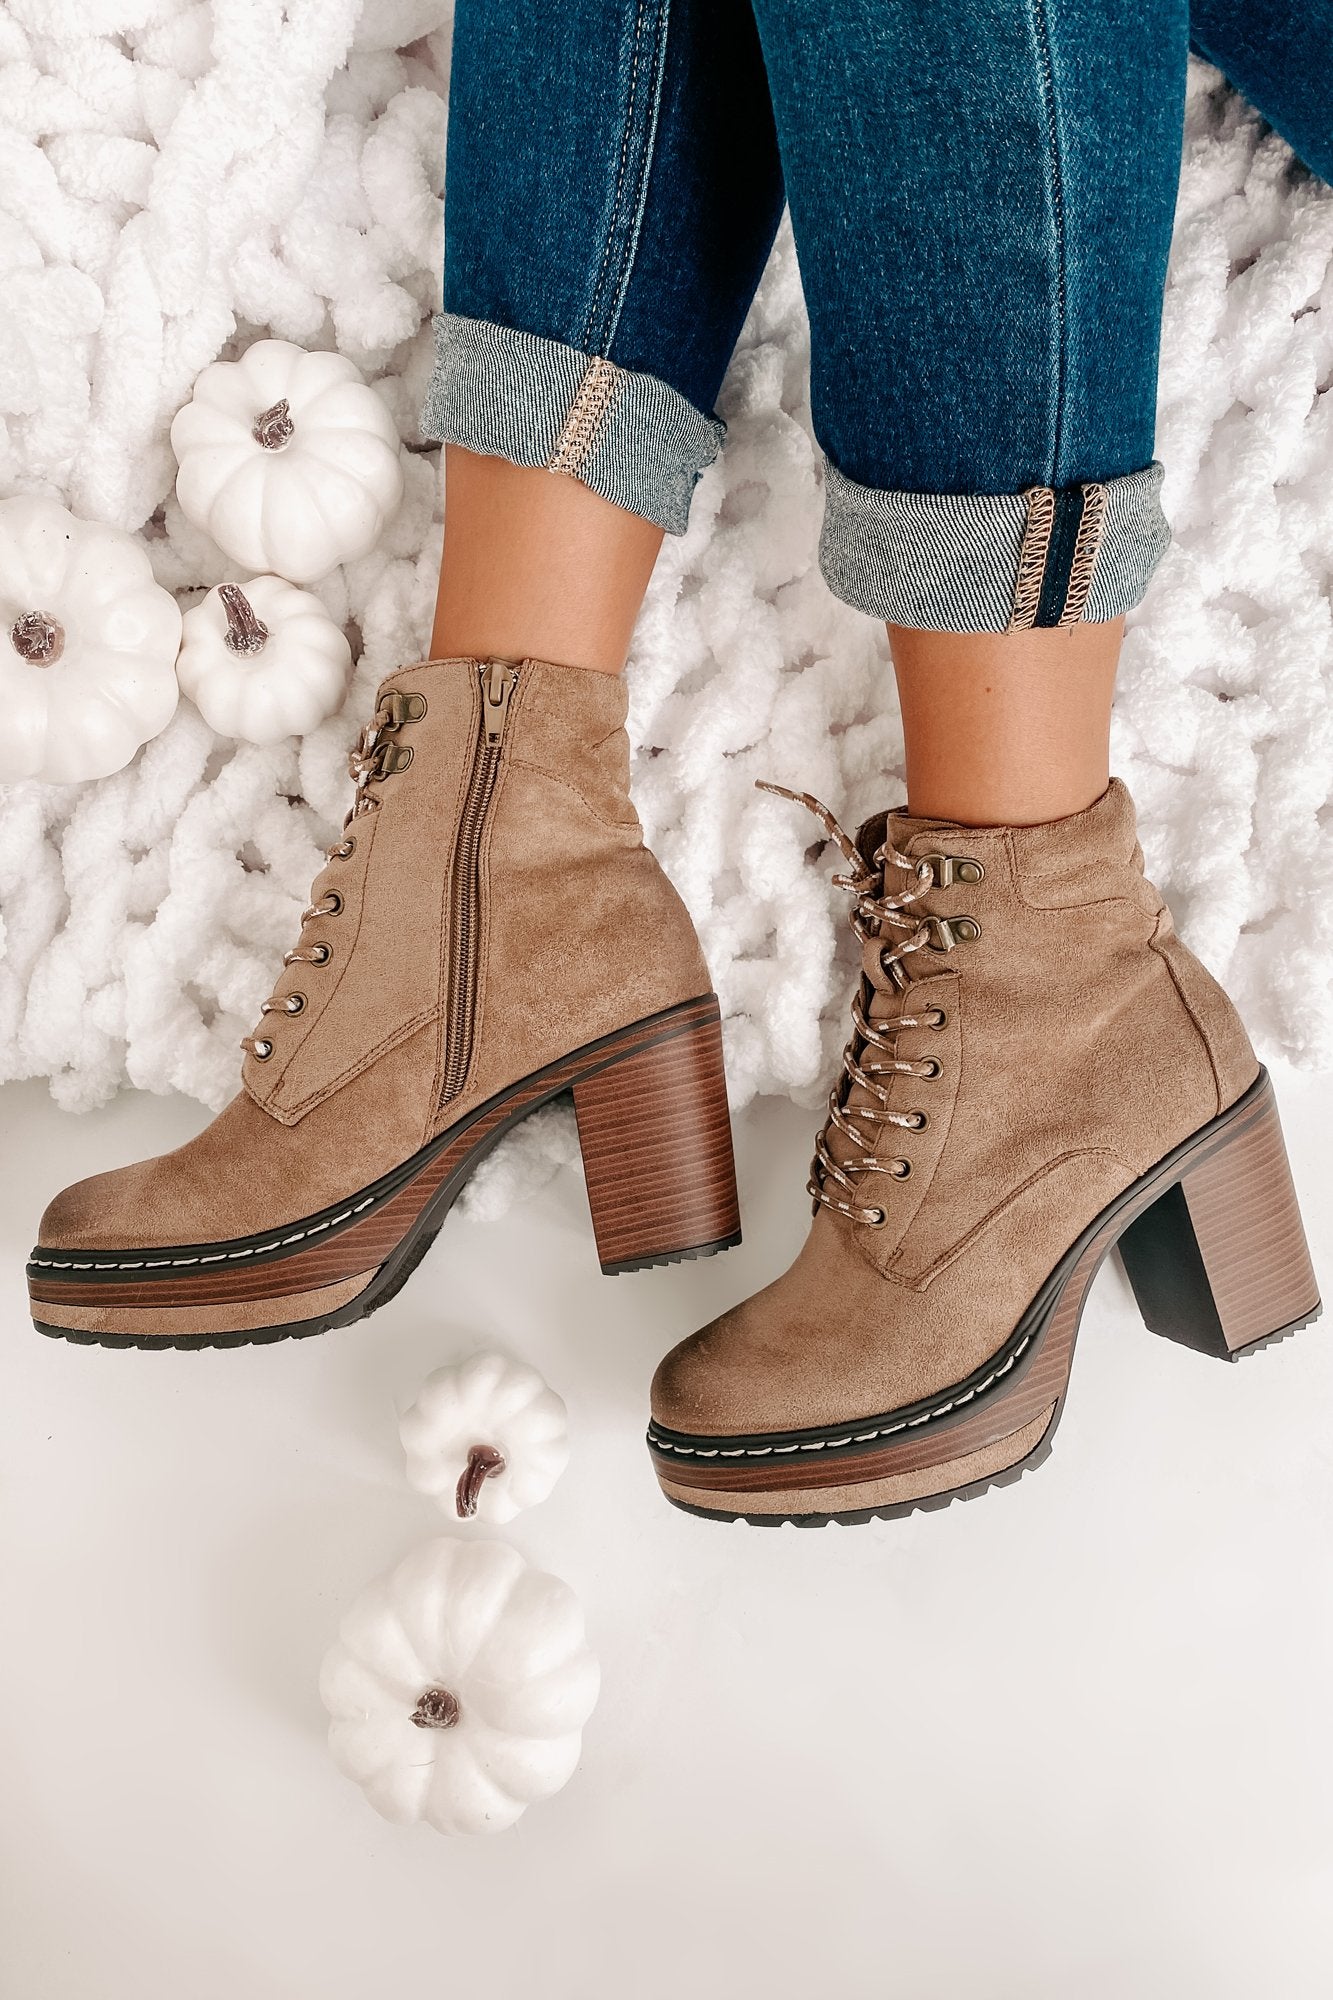 IMPERFECT Get Used To It Faux Suede Lace-Up Platform Booties (Taupe) - NanaMacs